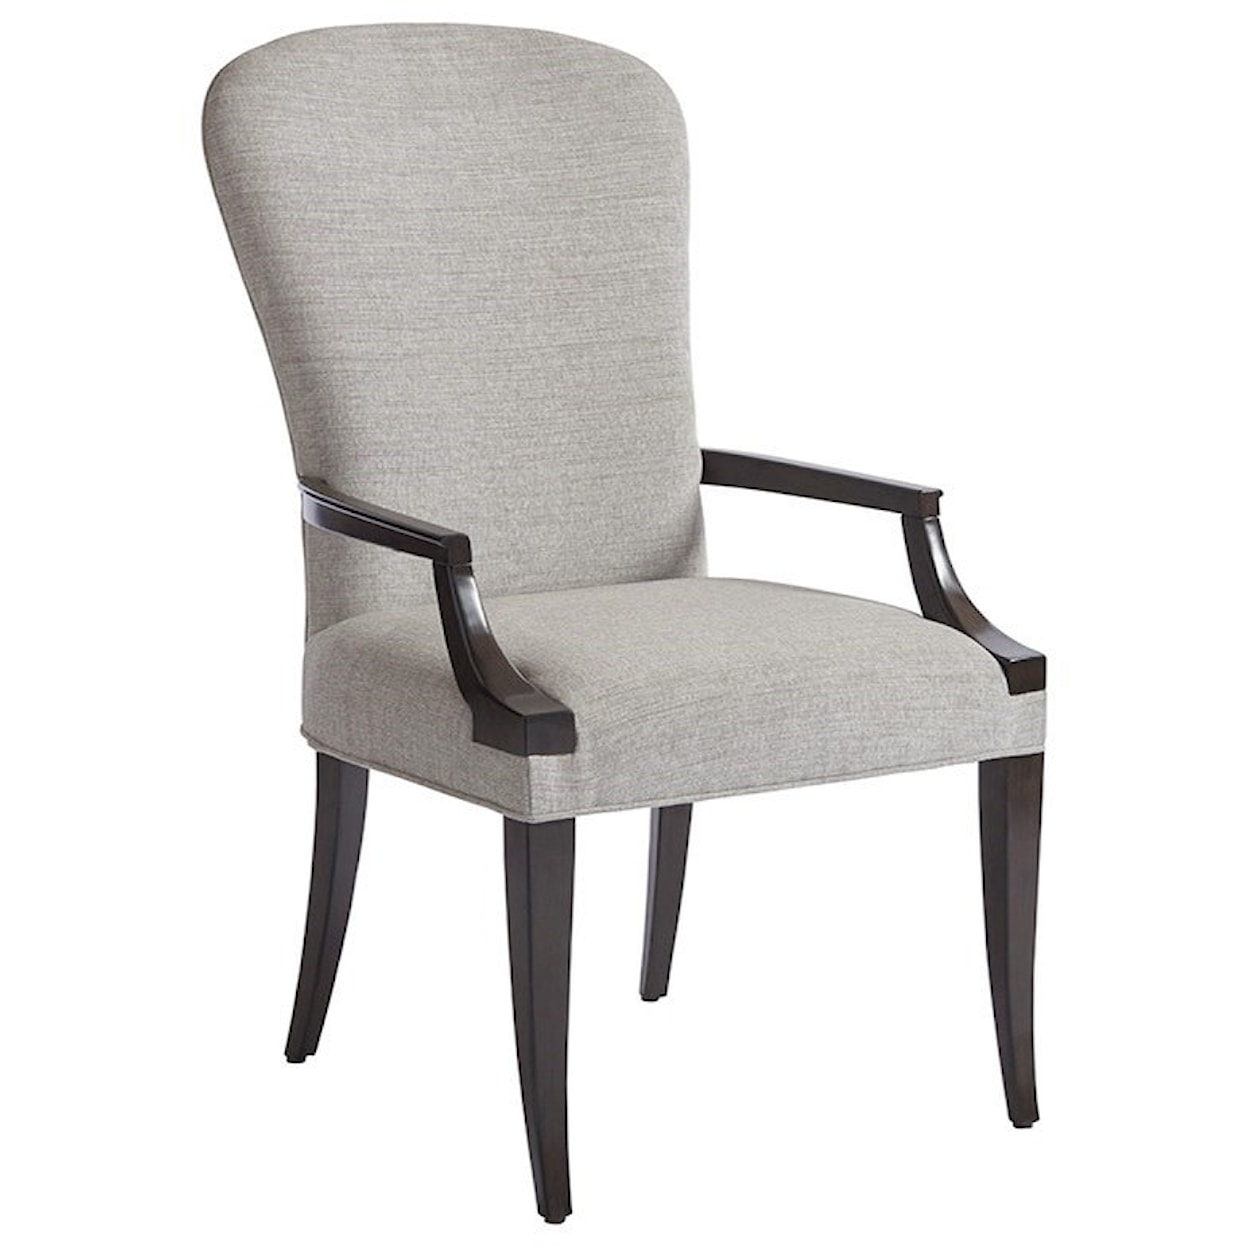 Barclay Butera Brentwood Schuler Upholstered Arm Chair (married)